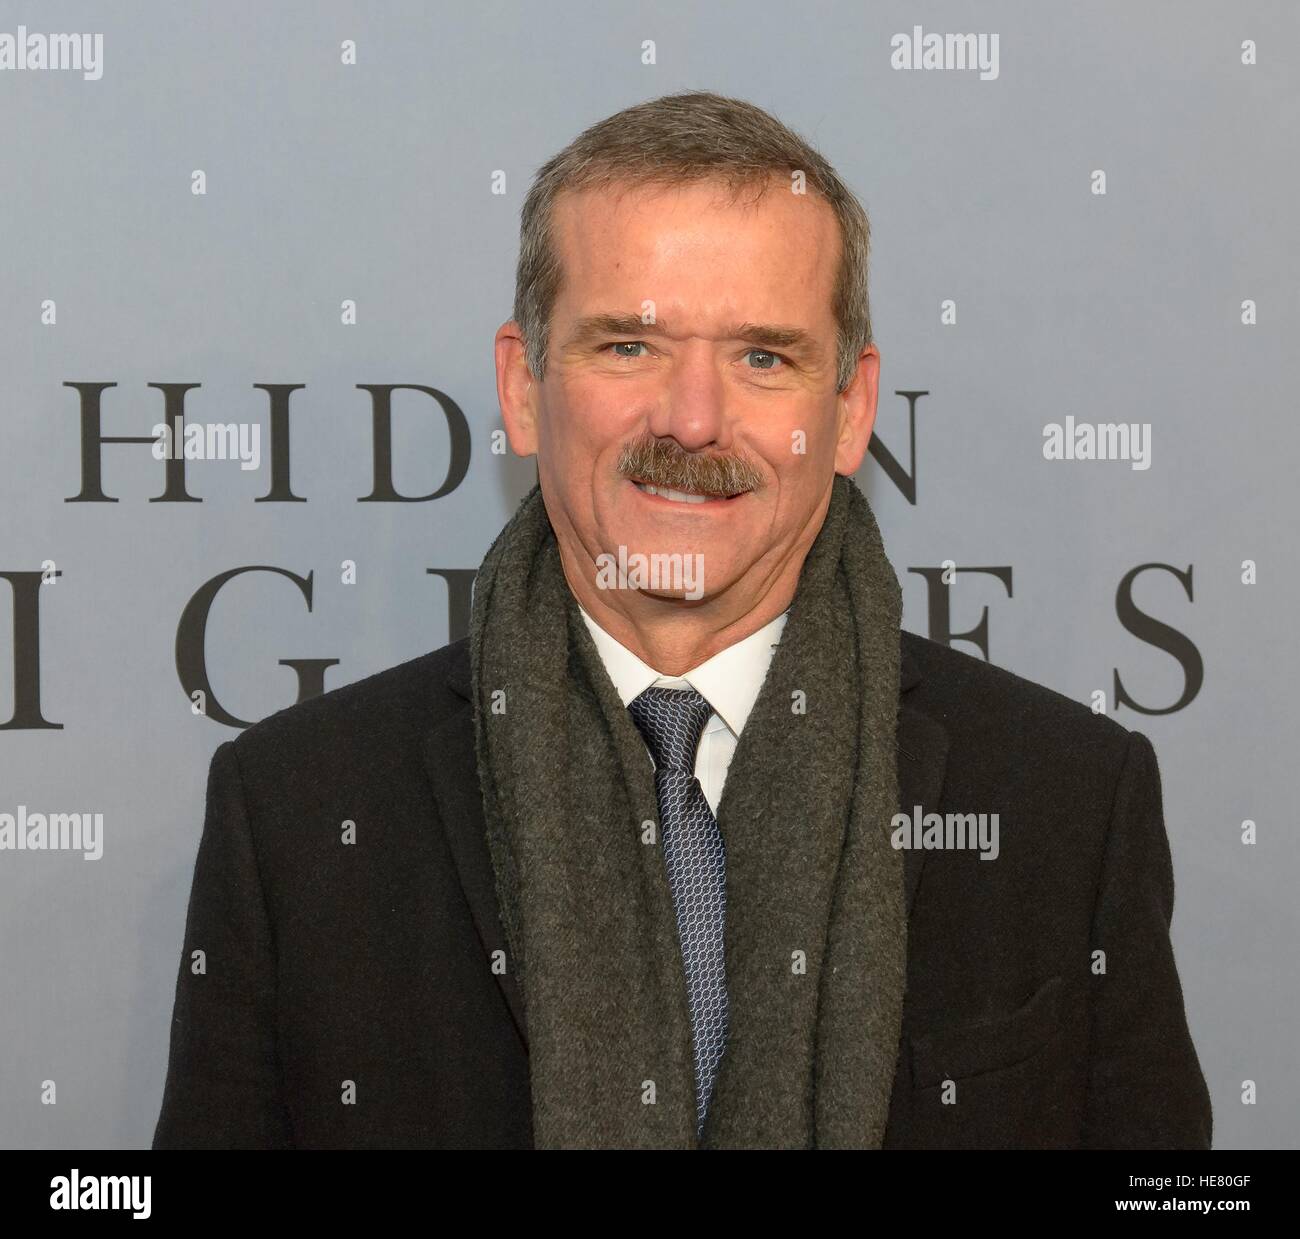 Canadian astronaut Chris Hadfield walks the red carpet during the global celebration event for the film Hidden Figures at the SVA Theatre December 10, 2016 in New York City, New York. The film is based on the true story of the African-American women who worked as human computers during the Friendship 7 mission in 1962. Stock Photo